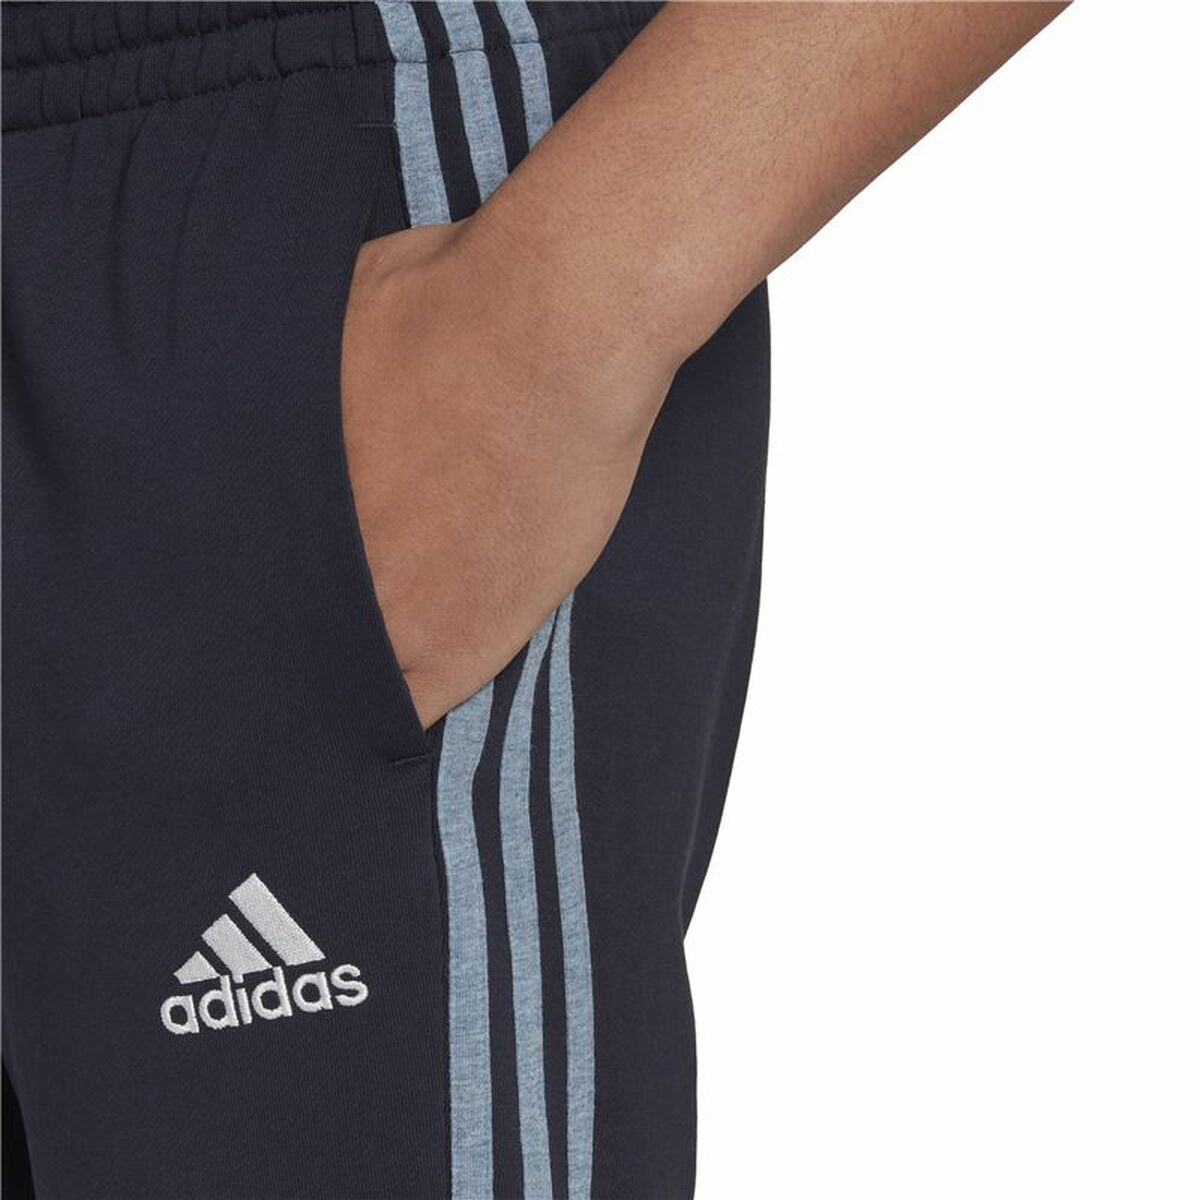 Adult Trousers Adidas Essentials Mélange Grey